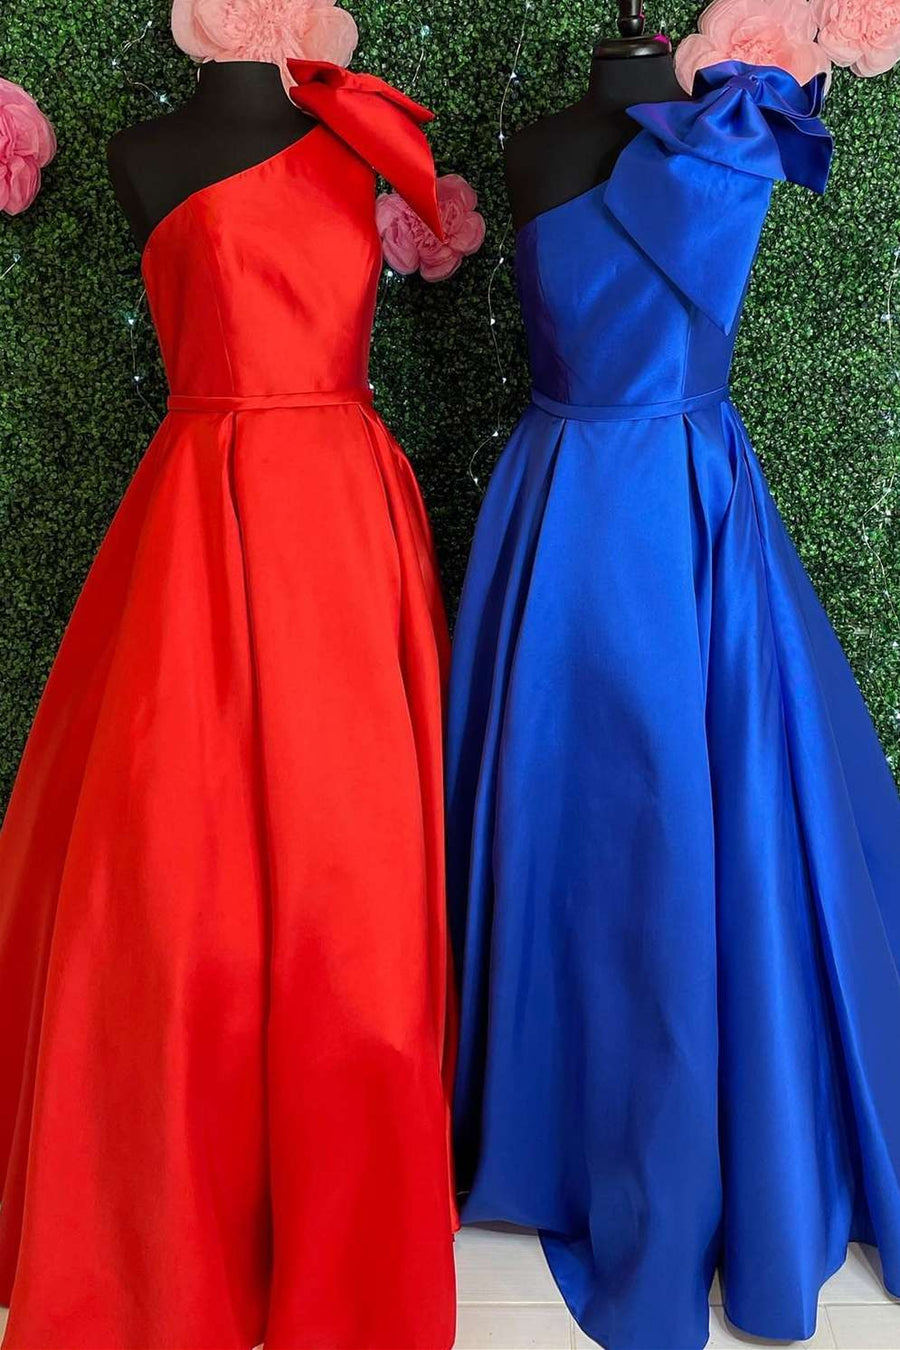 One-Shoulder Royal Blue Ball Gown with Bow